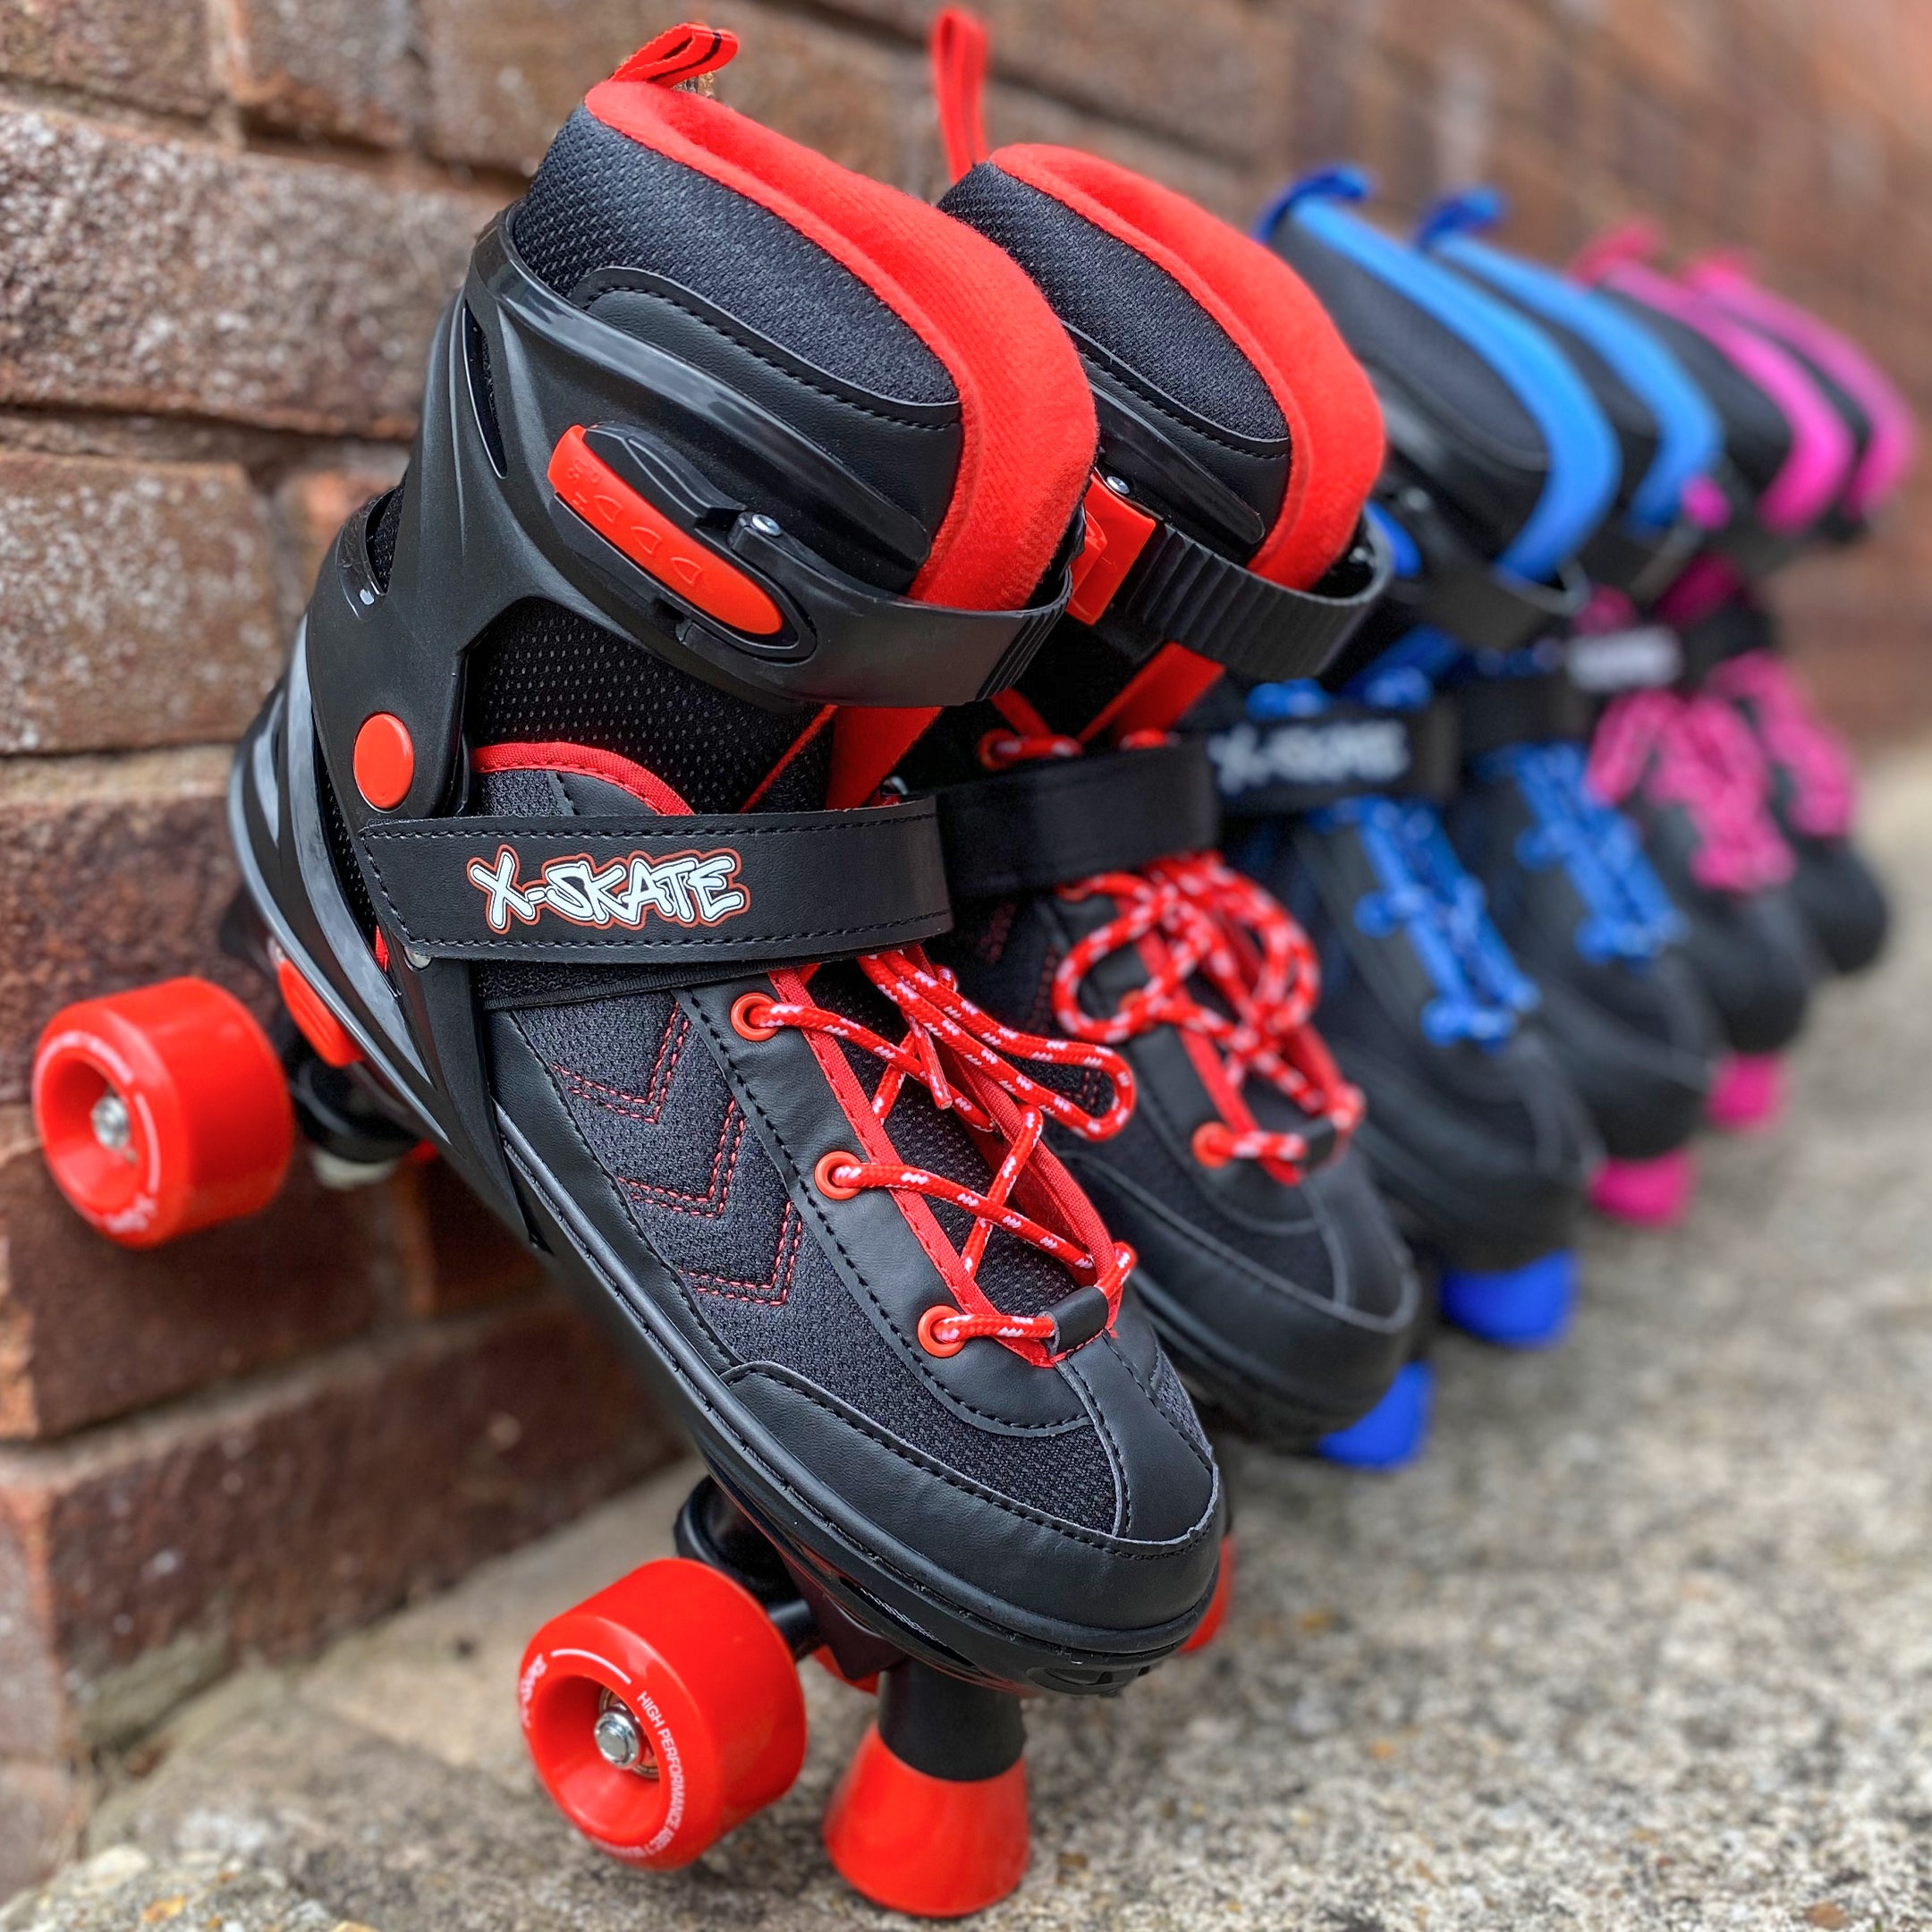 Take A Guided Tour of Our Adjustable Quad Skates.